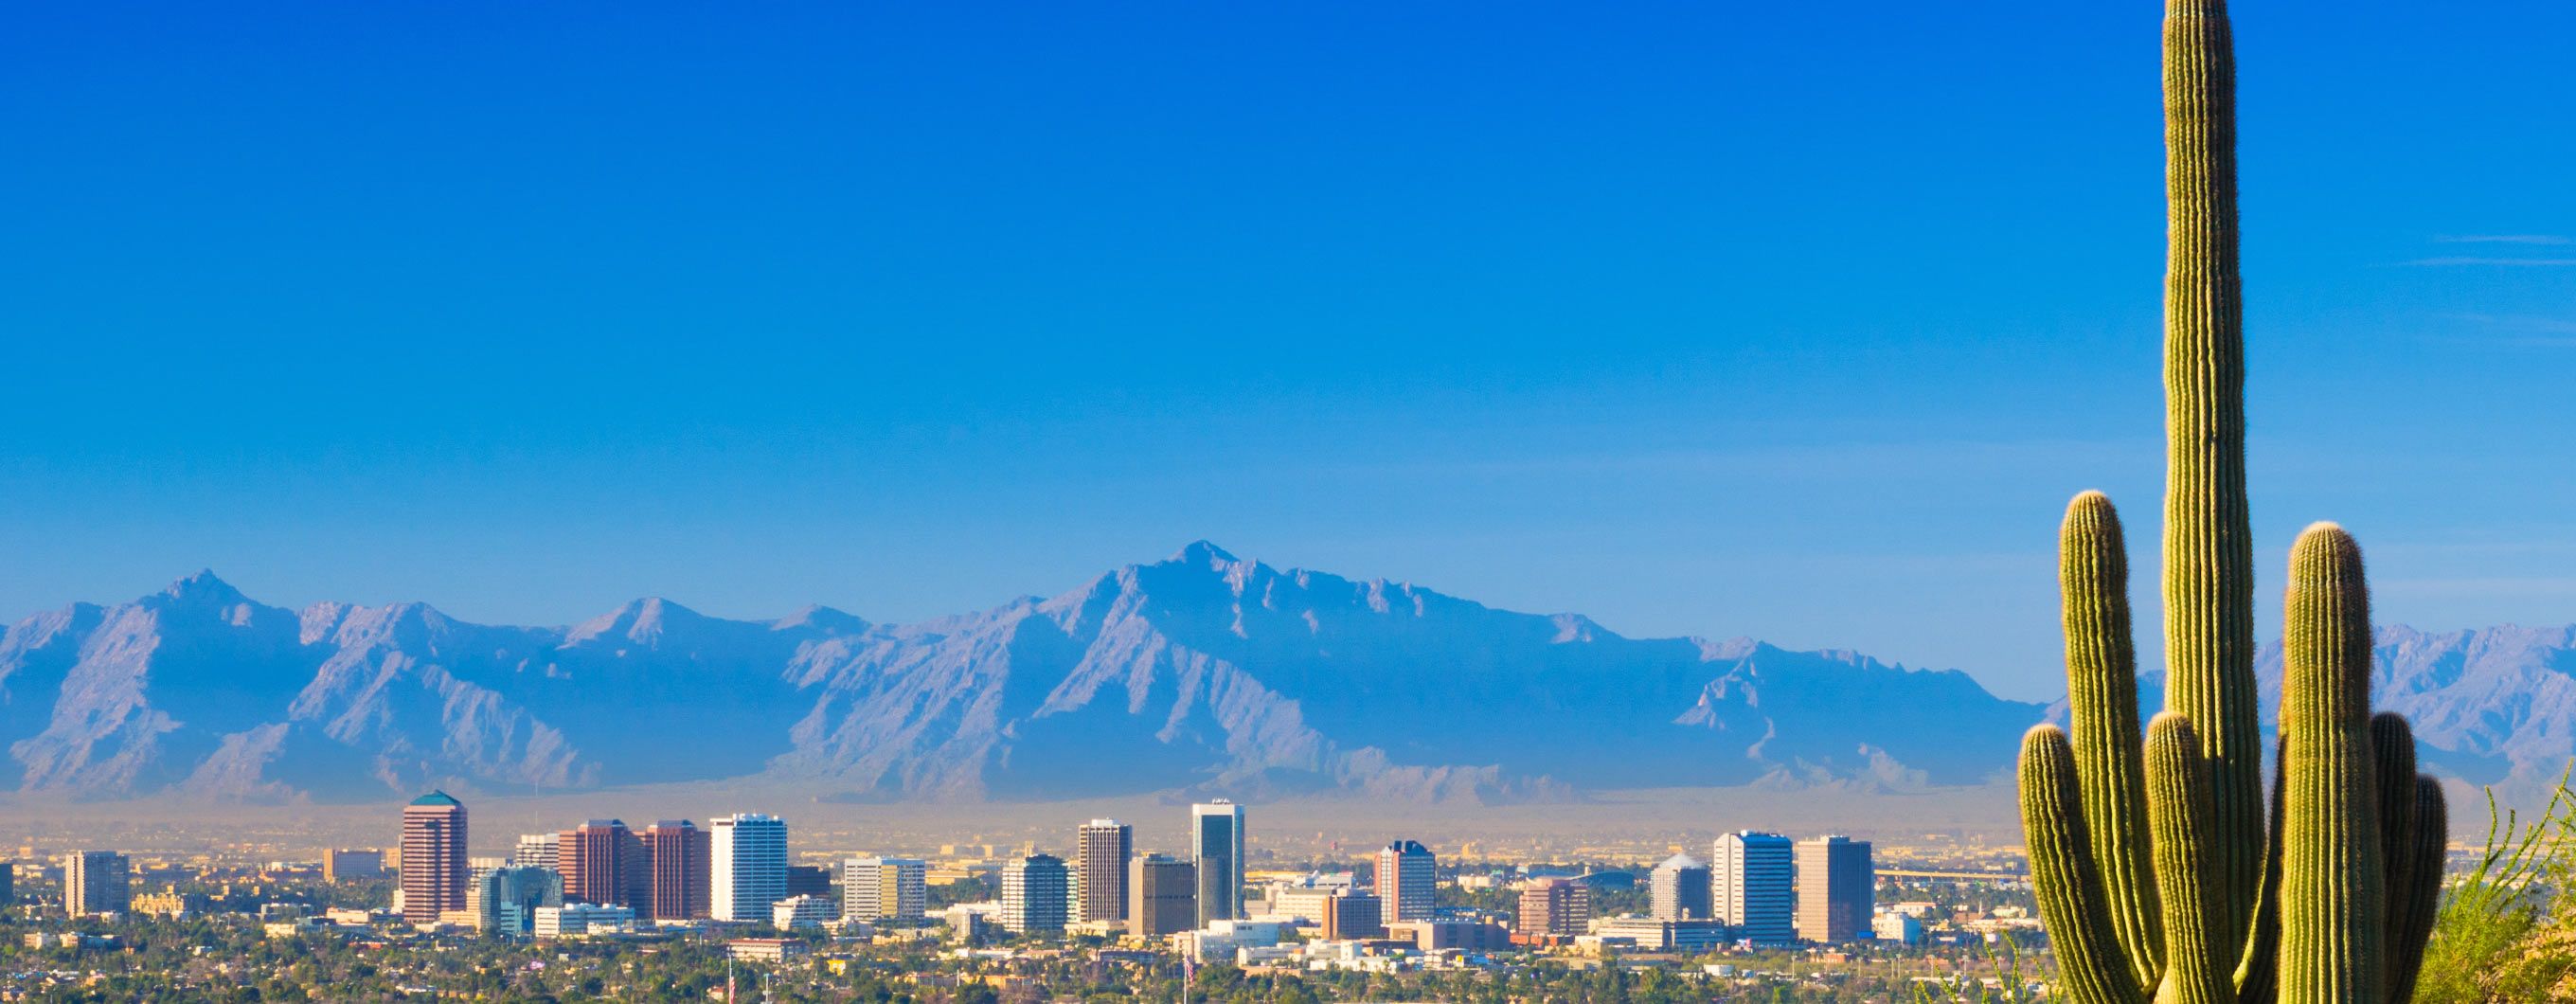 Image of a city in Arizona with mountains in the background and a cactus in the front right of the picture